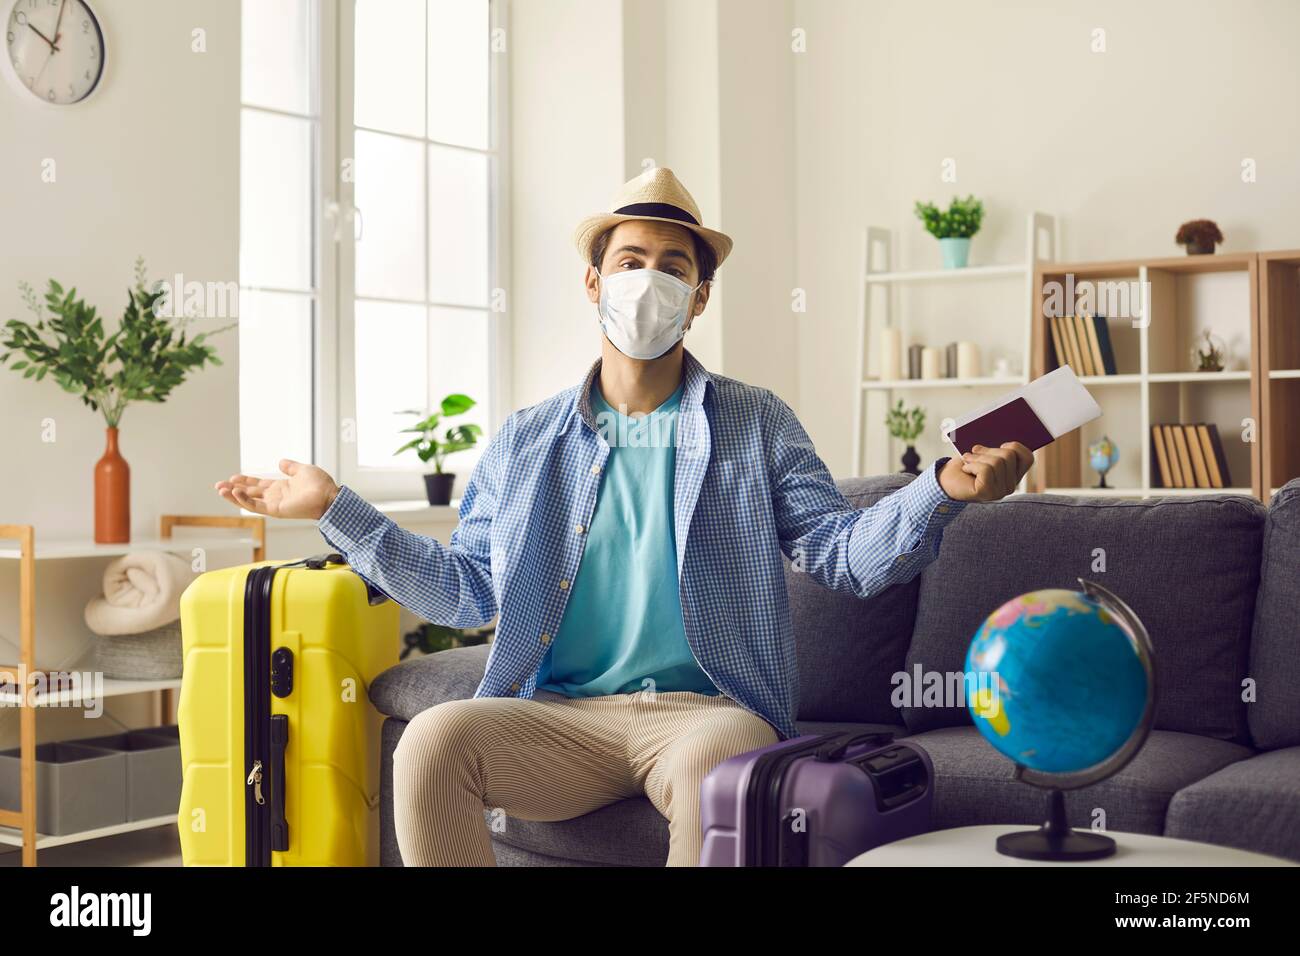 Upset man in face mask sitting with luggage and flight tickets at home Stock Photo